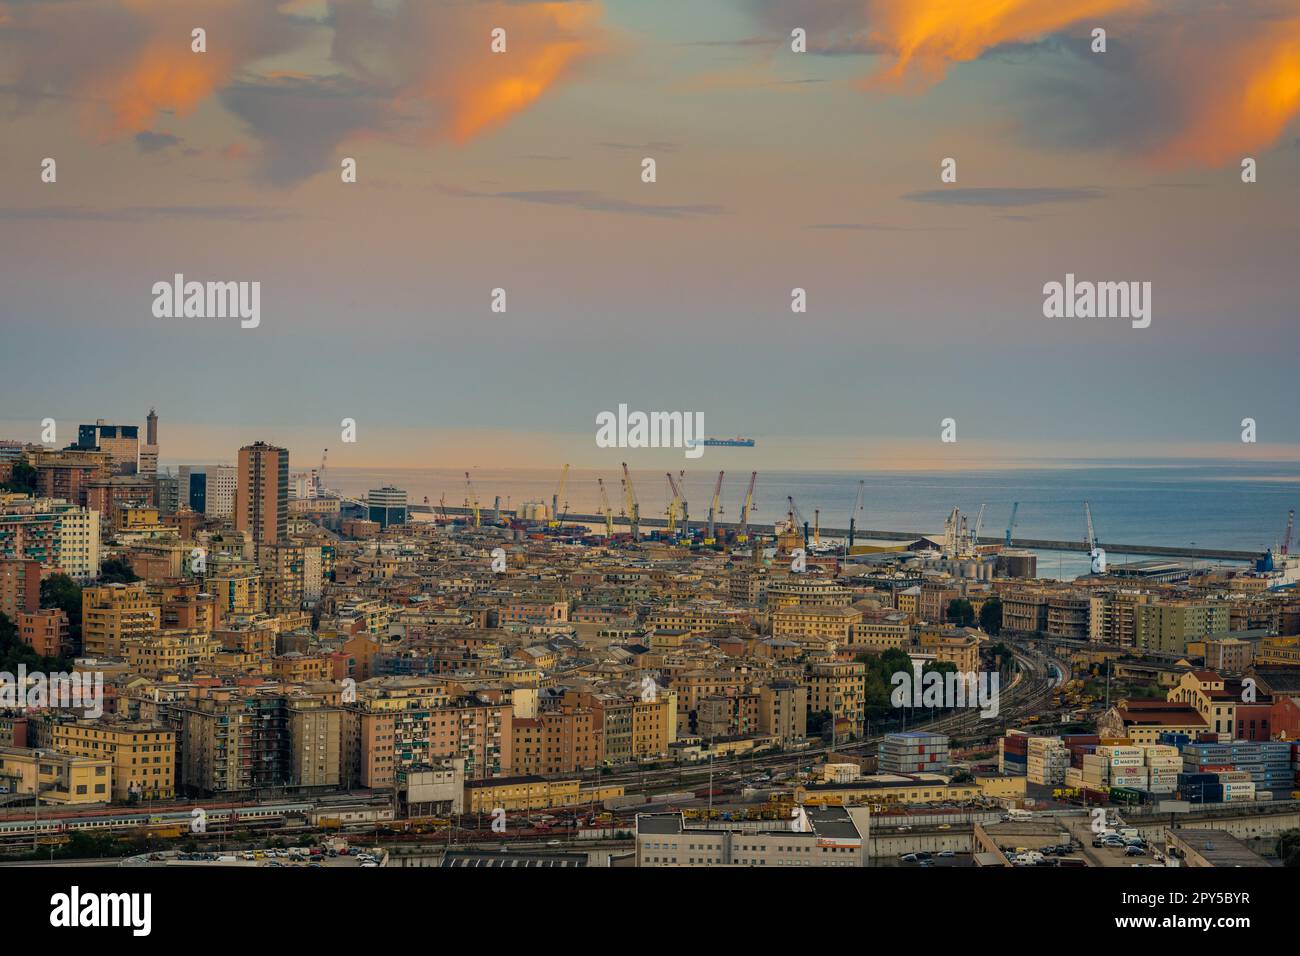 Genoa, Italy - 09 15 2020: Aerial view of the harbor. Time lapse Stock Photo